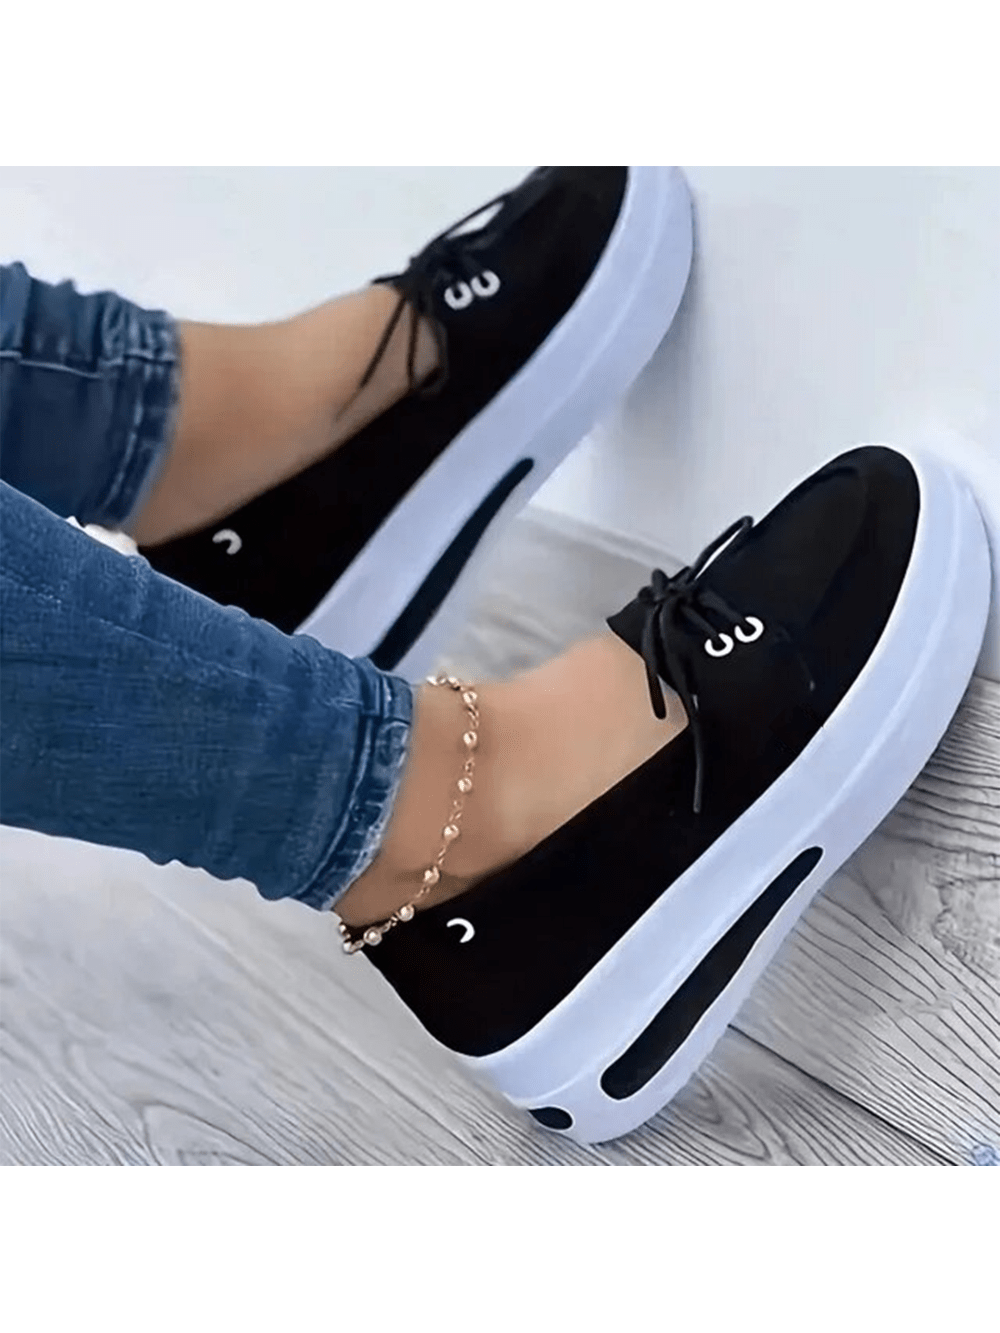 Women Block Shoes Slip On Closed Toe Platform Flat Wedge Casual Lace Up Sneakers-Black-1